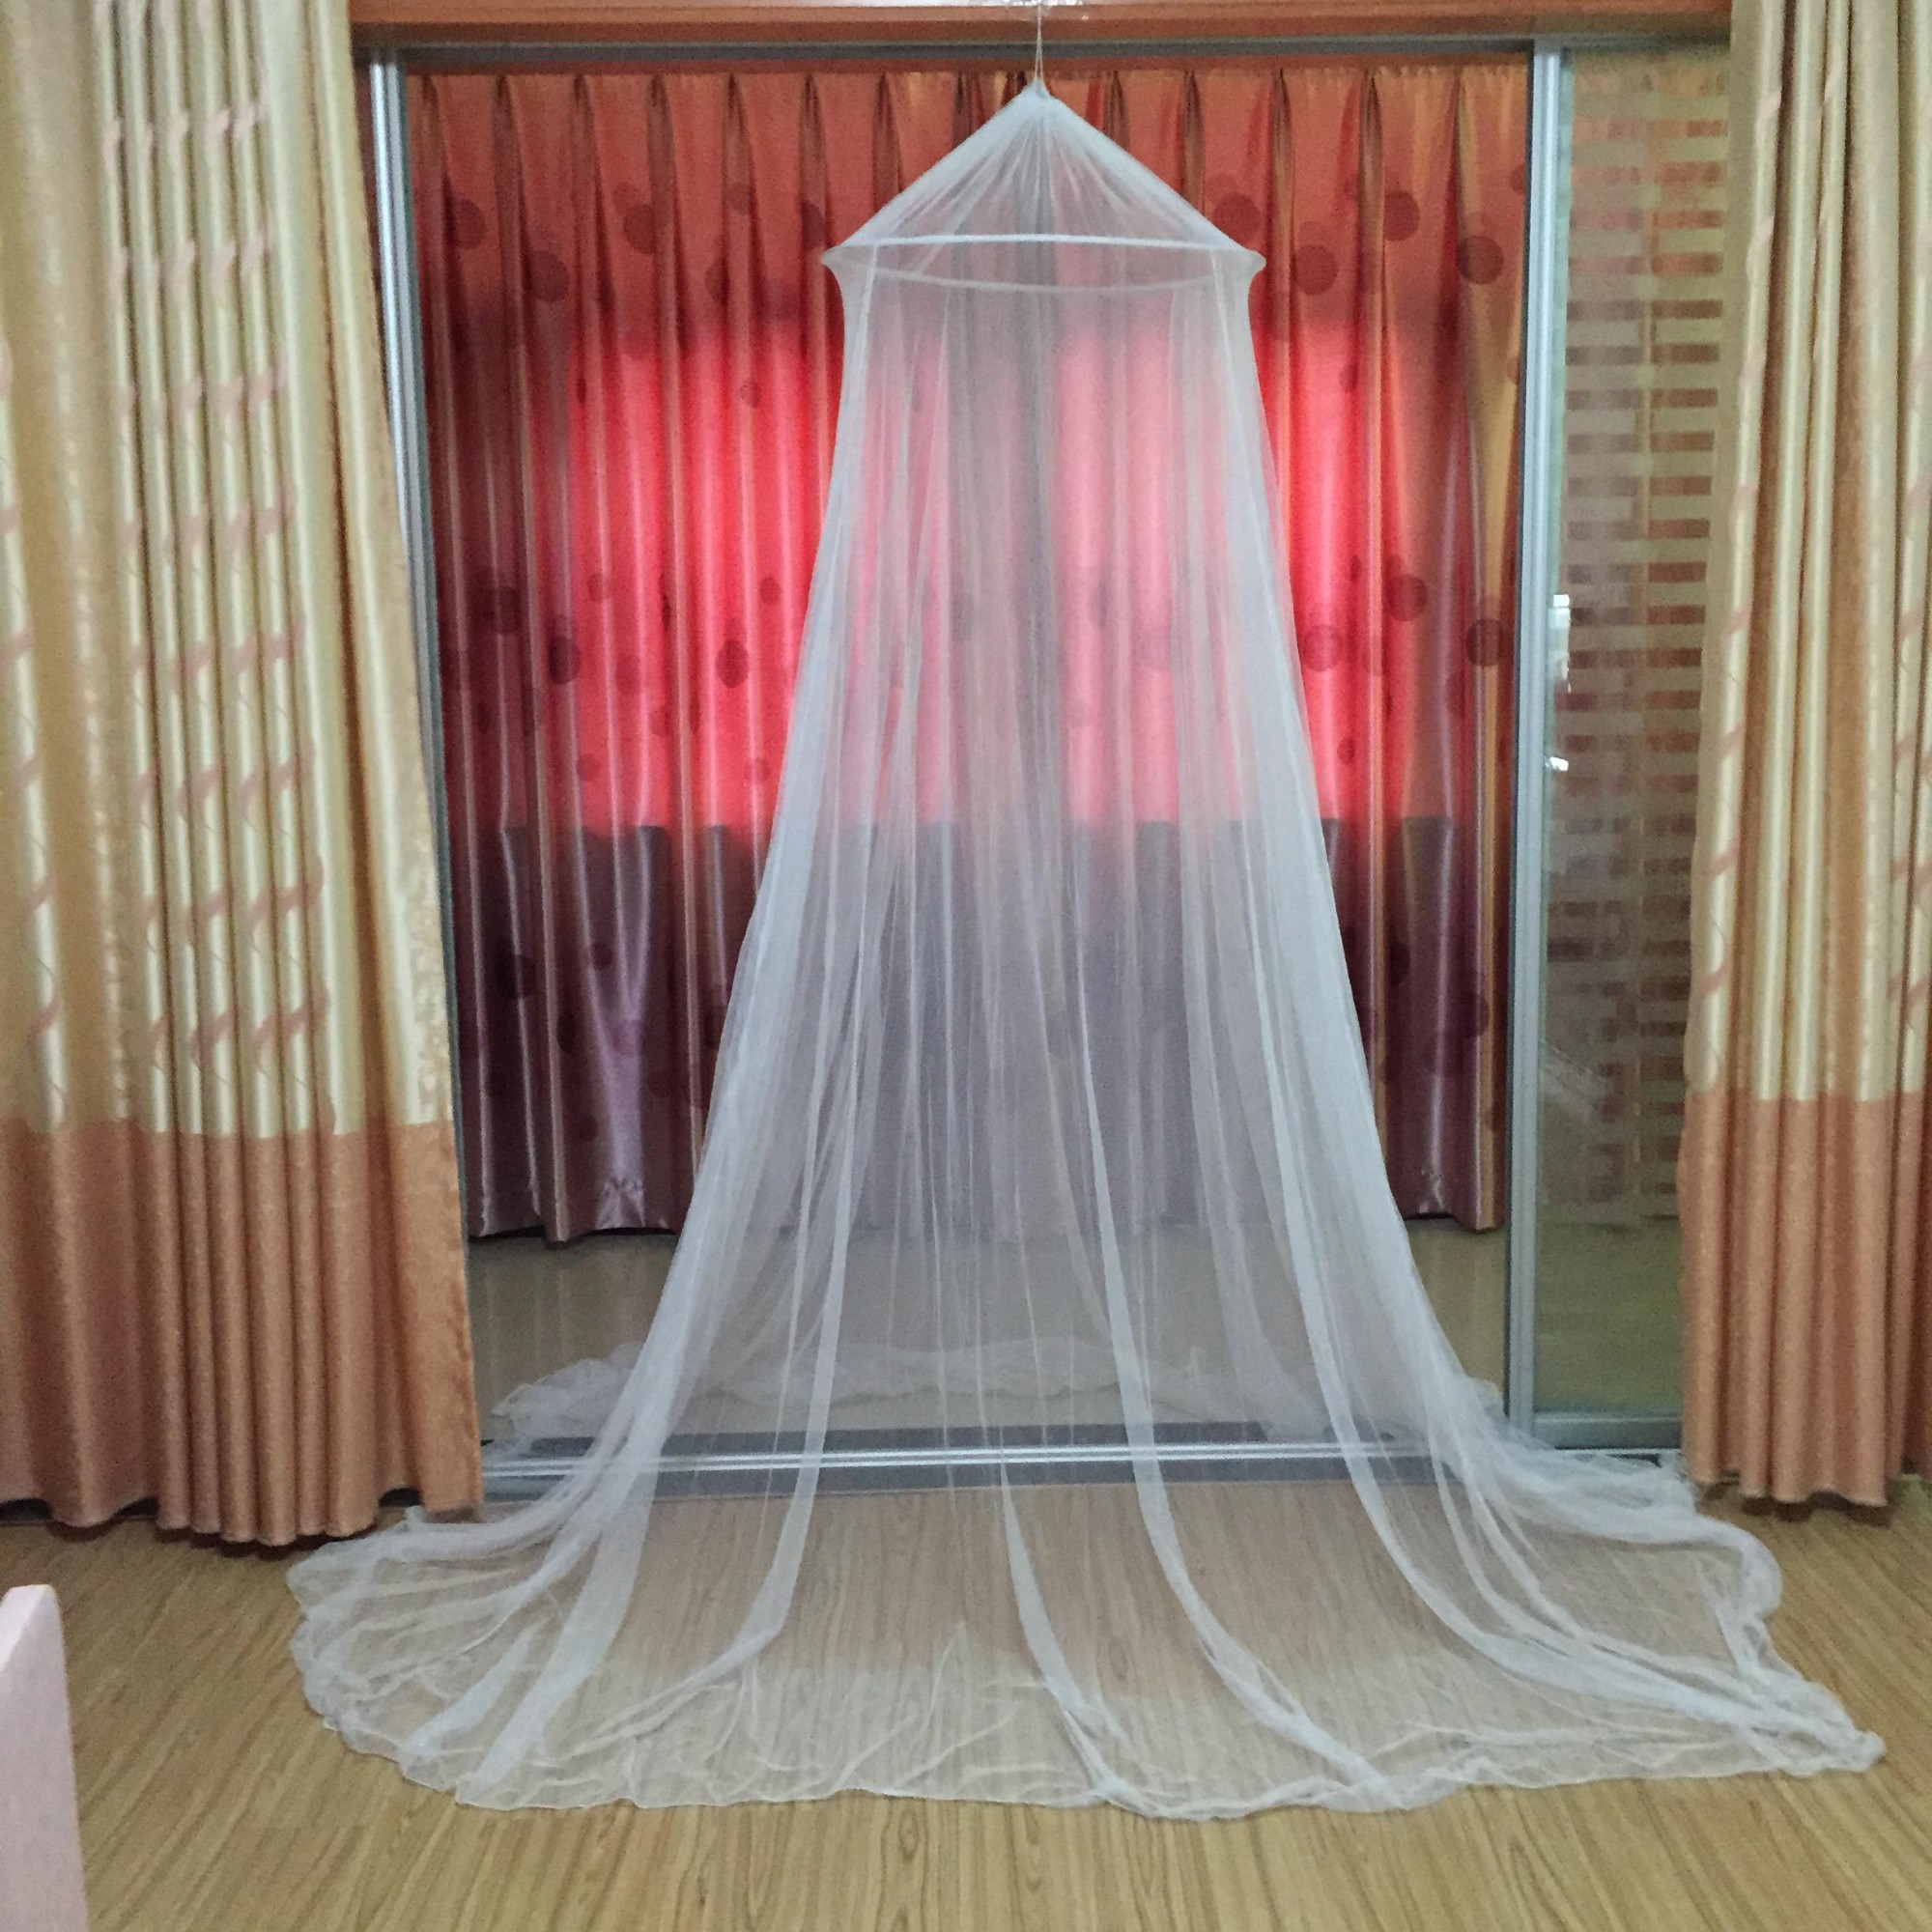 Long Lasting Insecticide Treated Conical Mosquito Net WHO standard